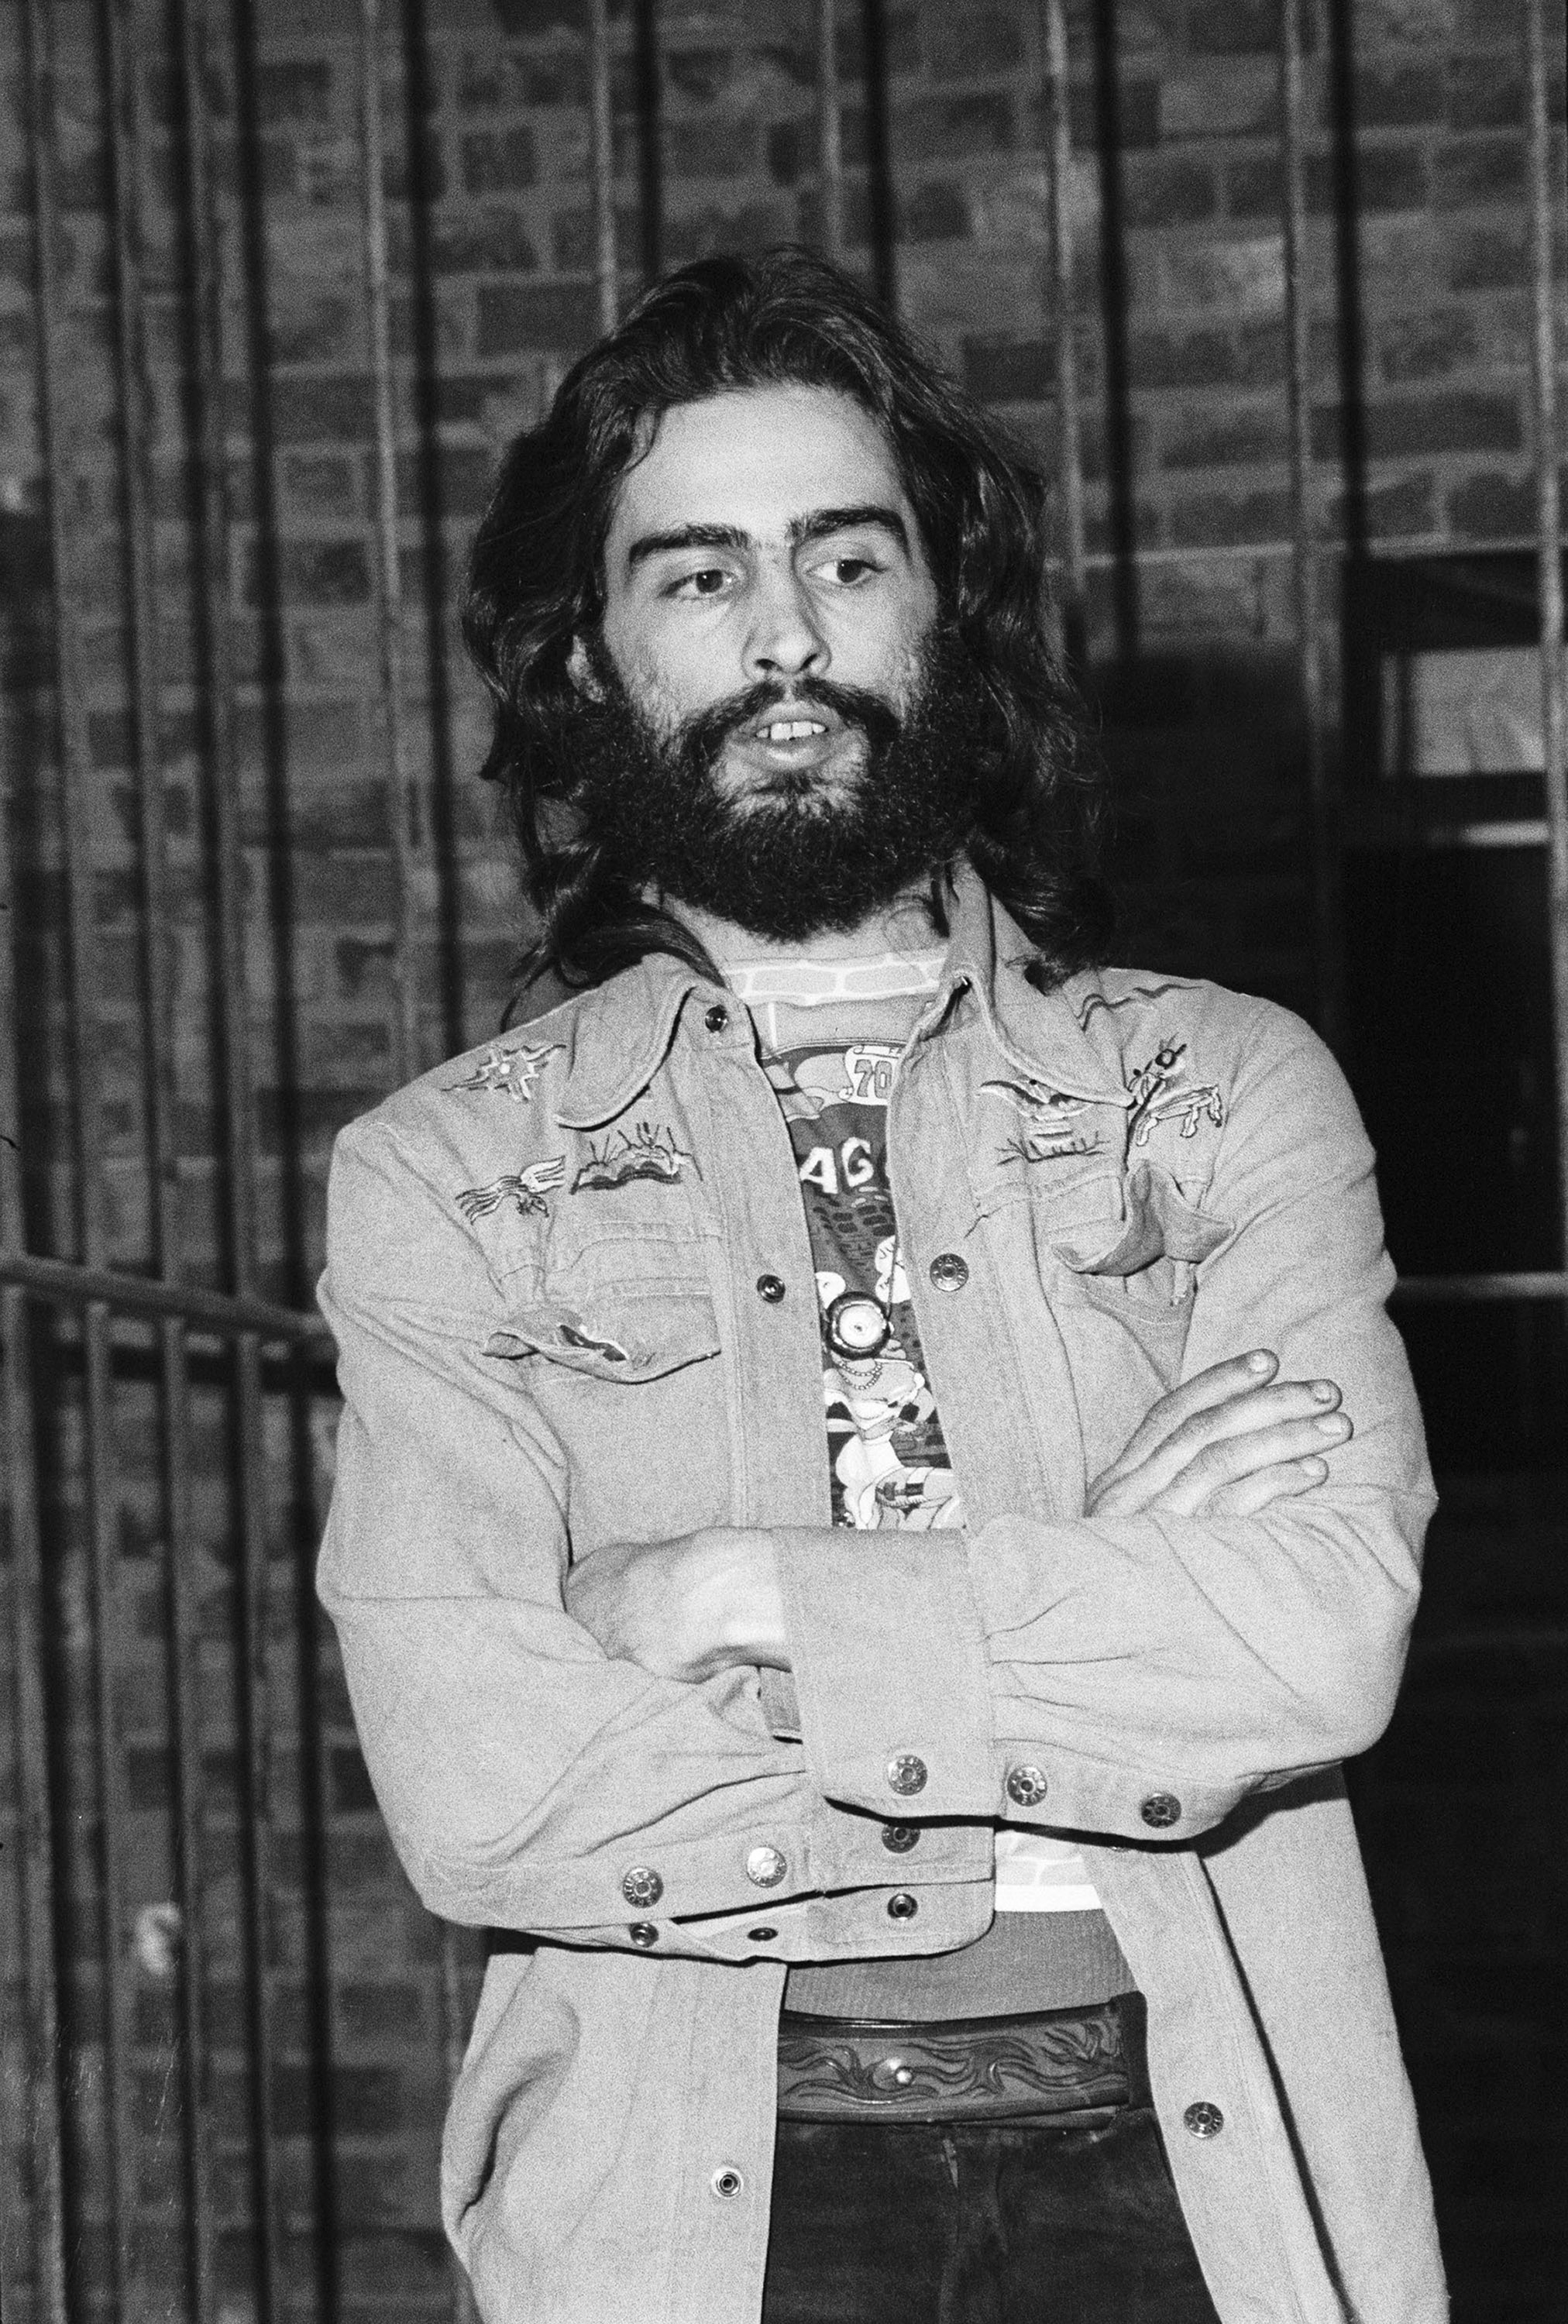 Interview: The Loft Founder David Mancuso | Red Bull Music Academy Daily